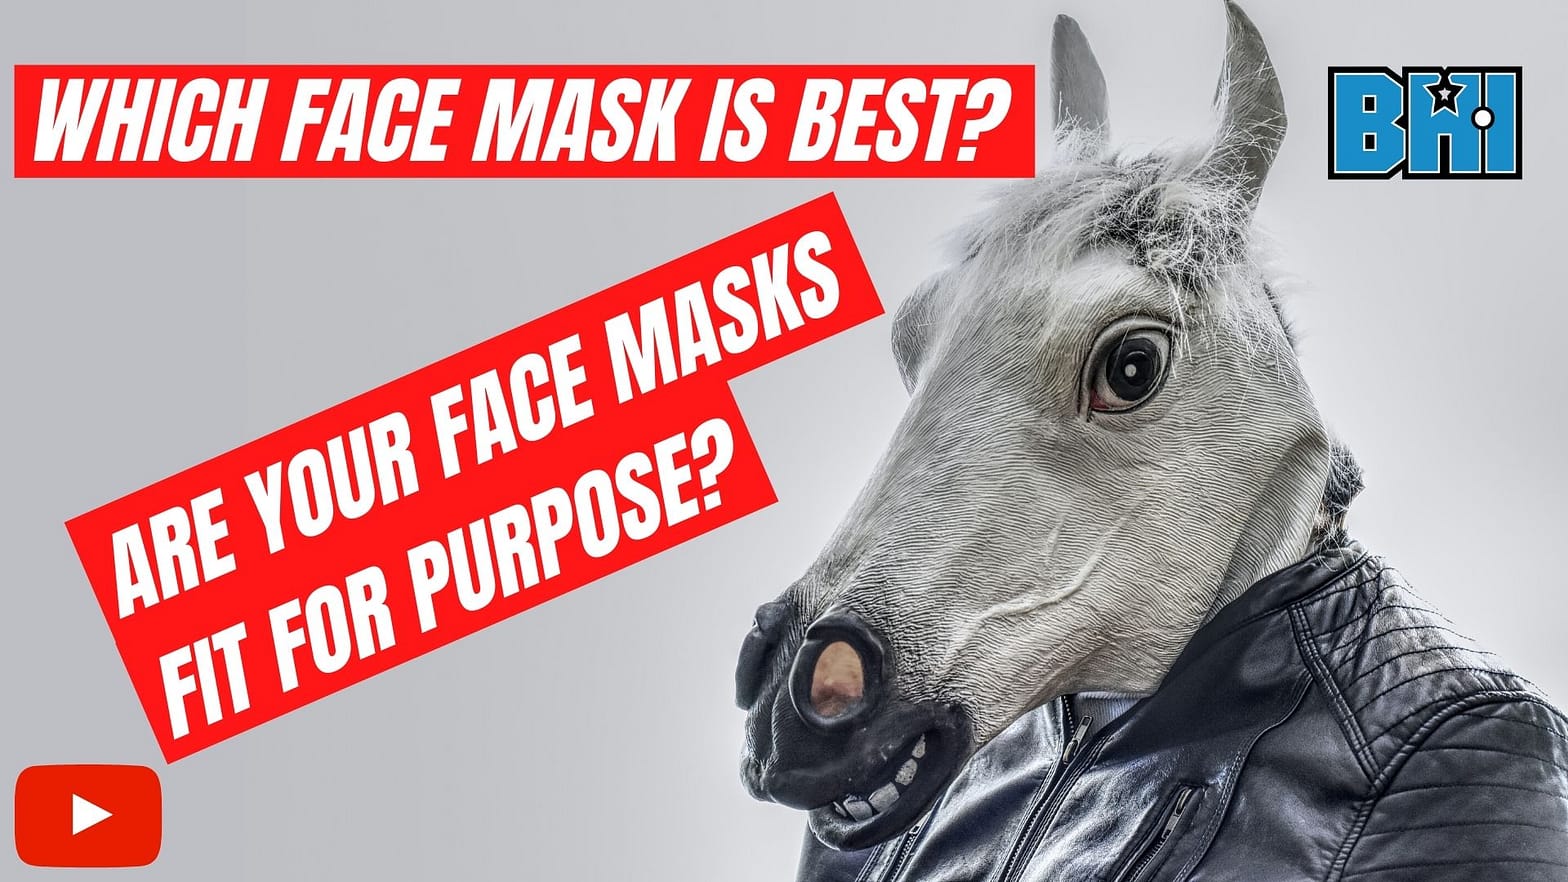 BHI - What face mask is best for you and your business?